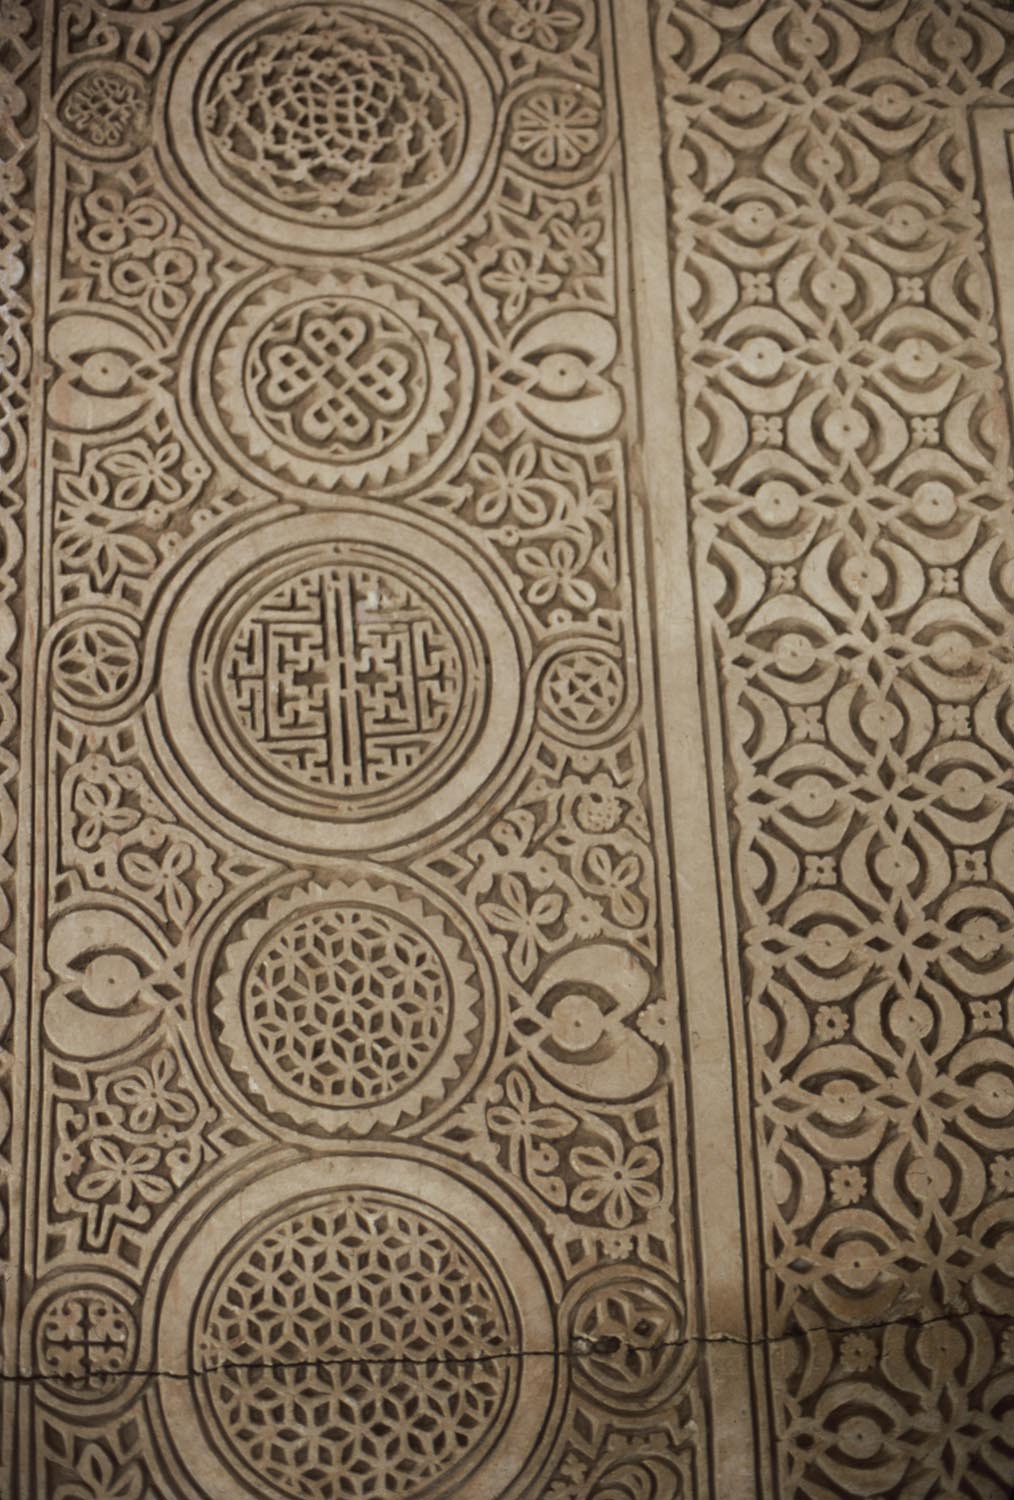 Detail view of mihrab, showing carved stucco roundels filled with geometric patterns.